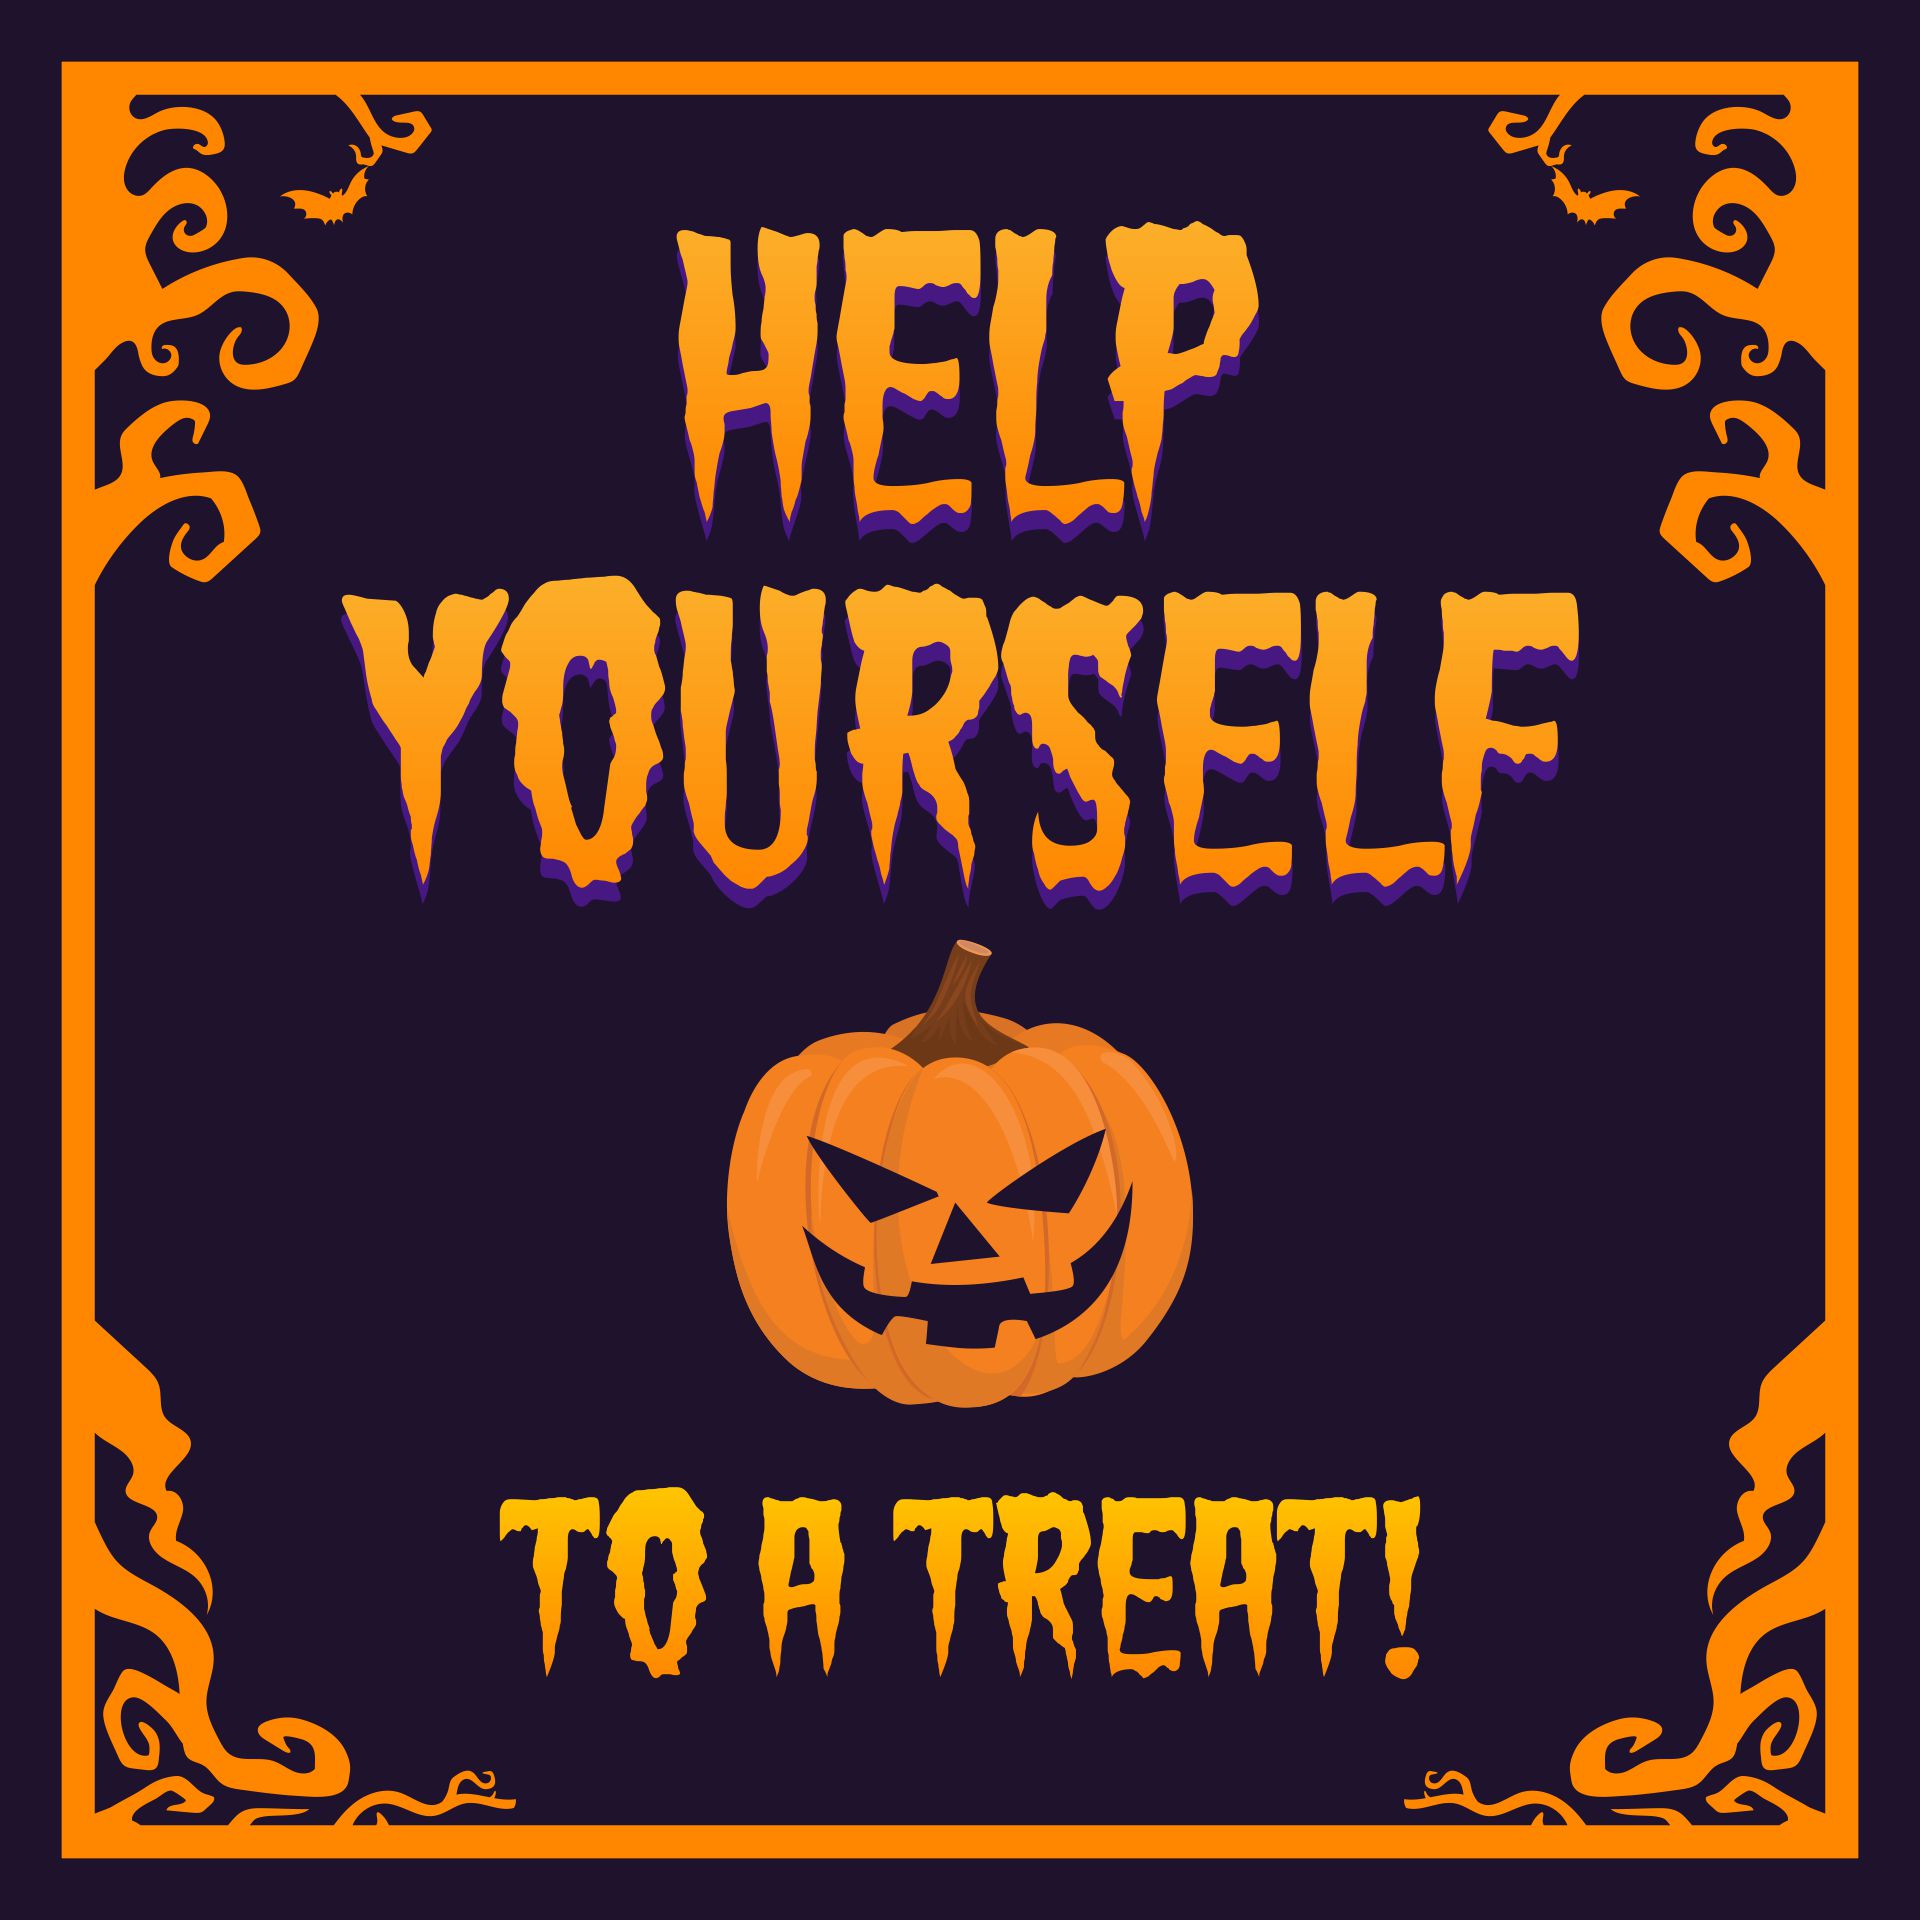 Printable Halloween Porch Decorations Help Yourself Sign